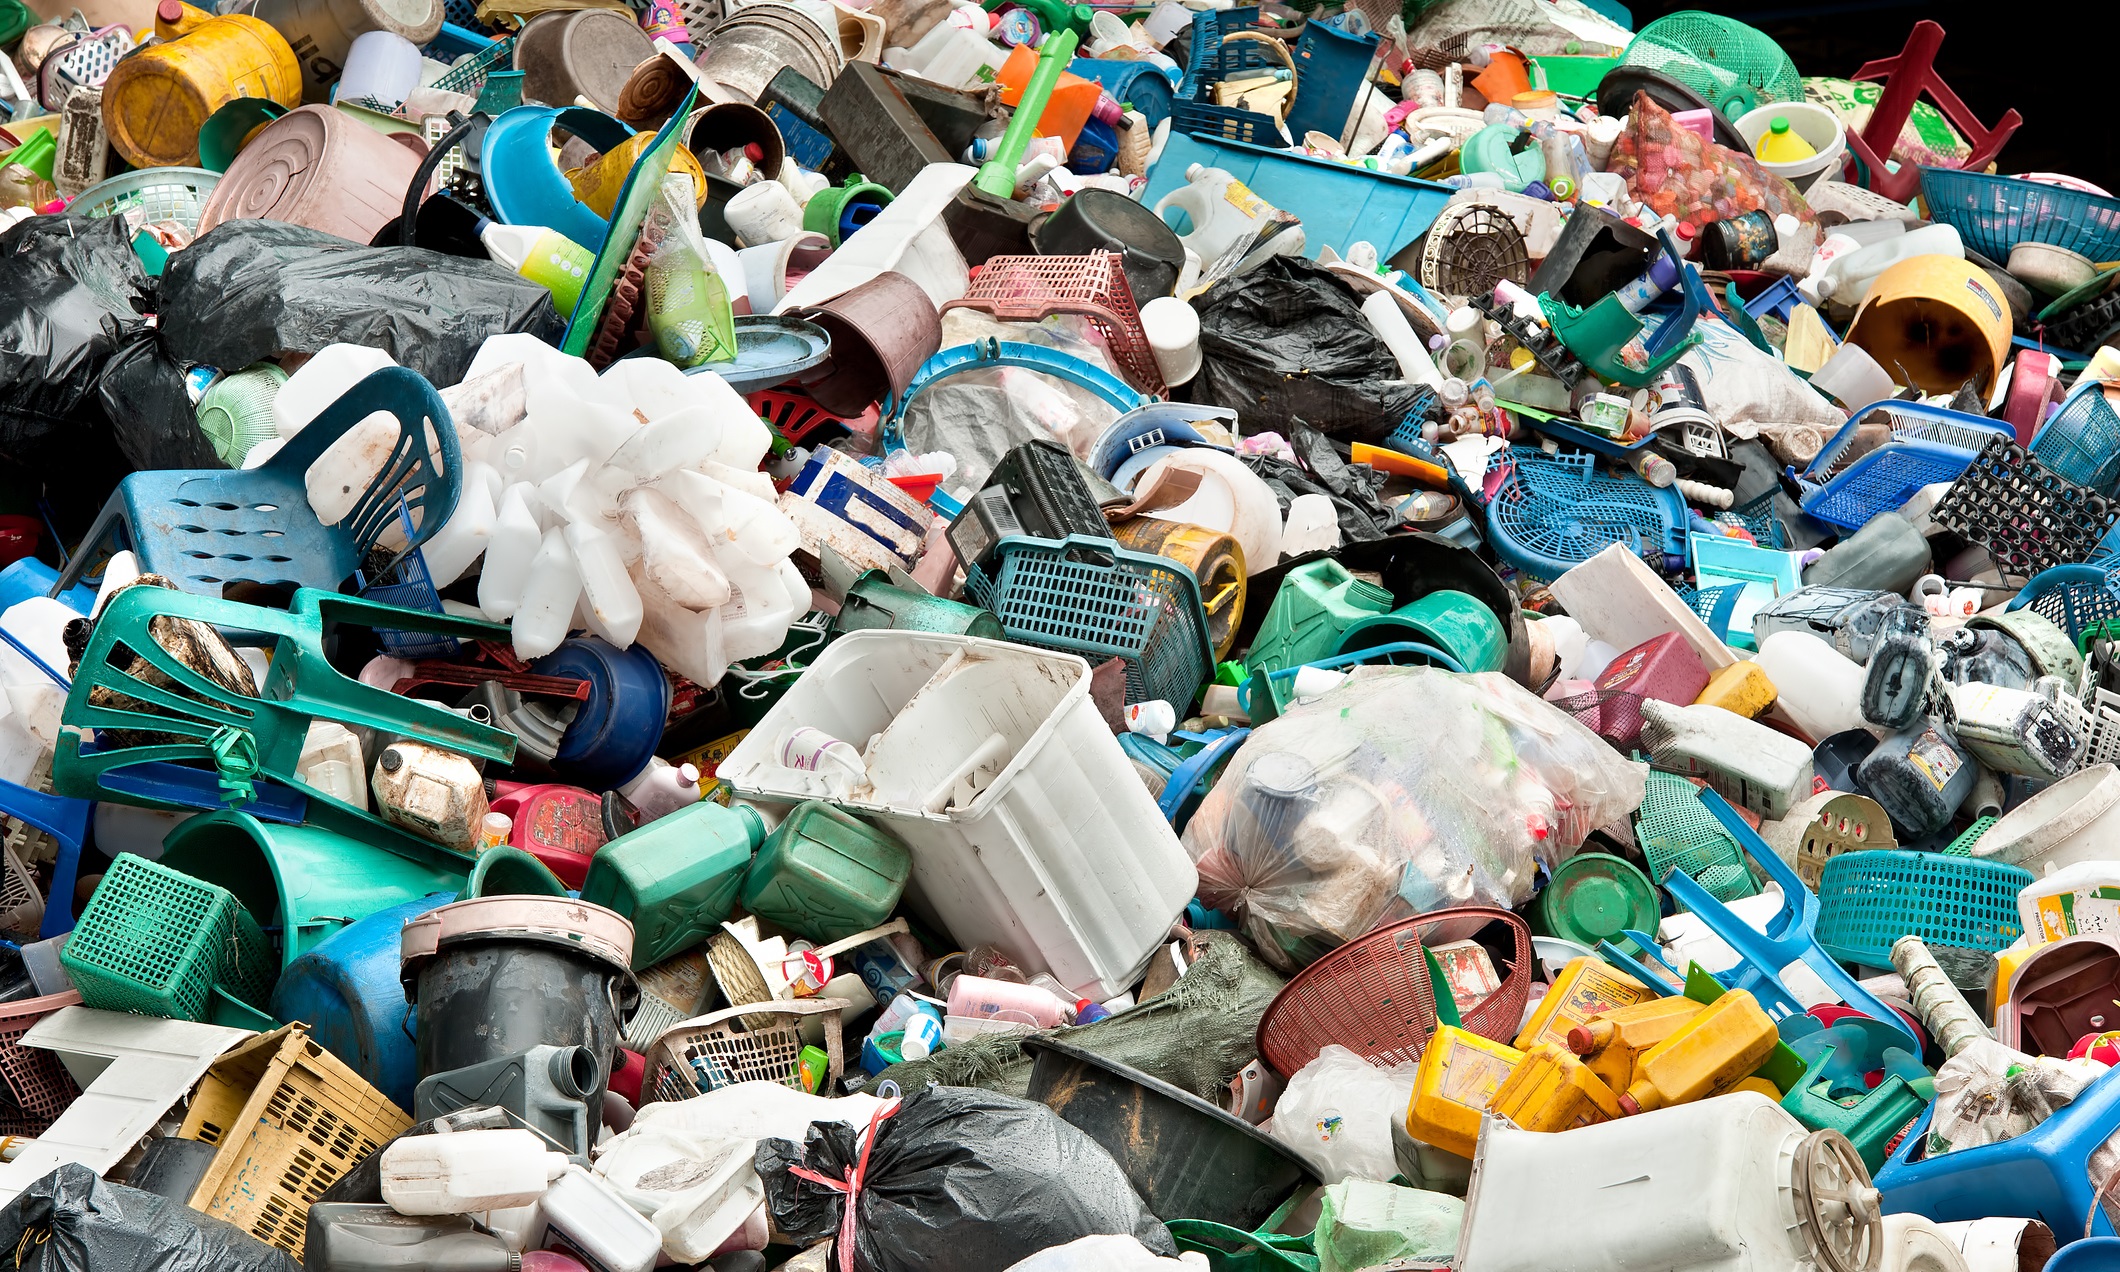 Oxford scientists launch ambitious roadmap for a circular carbon plastics economy | University of Oxford